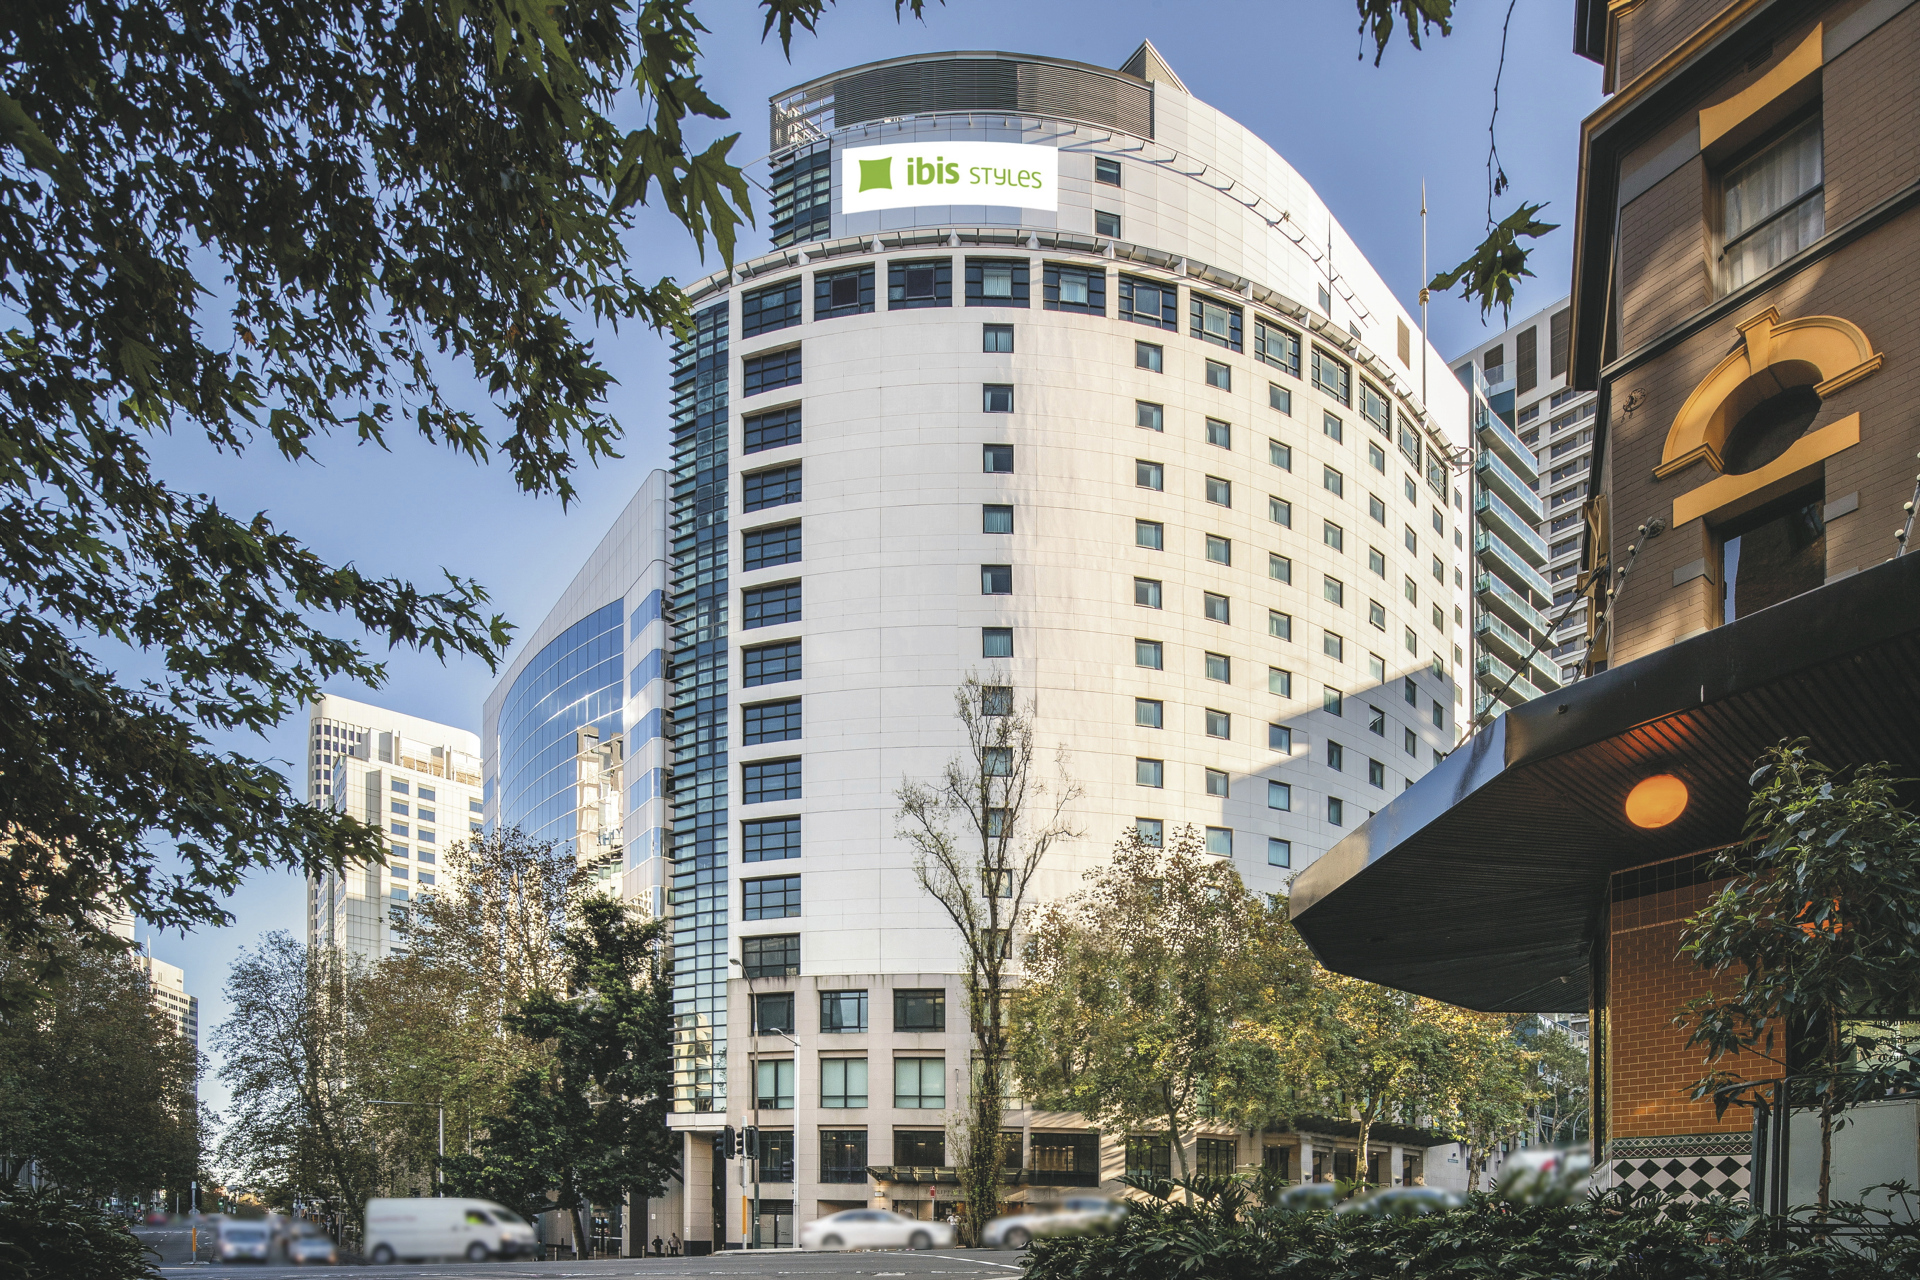 Ibis Styles City Central, ©Damien Ford Photography